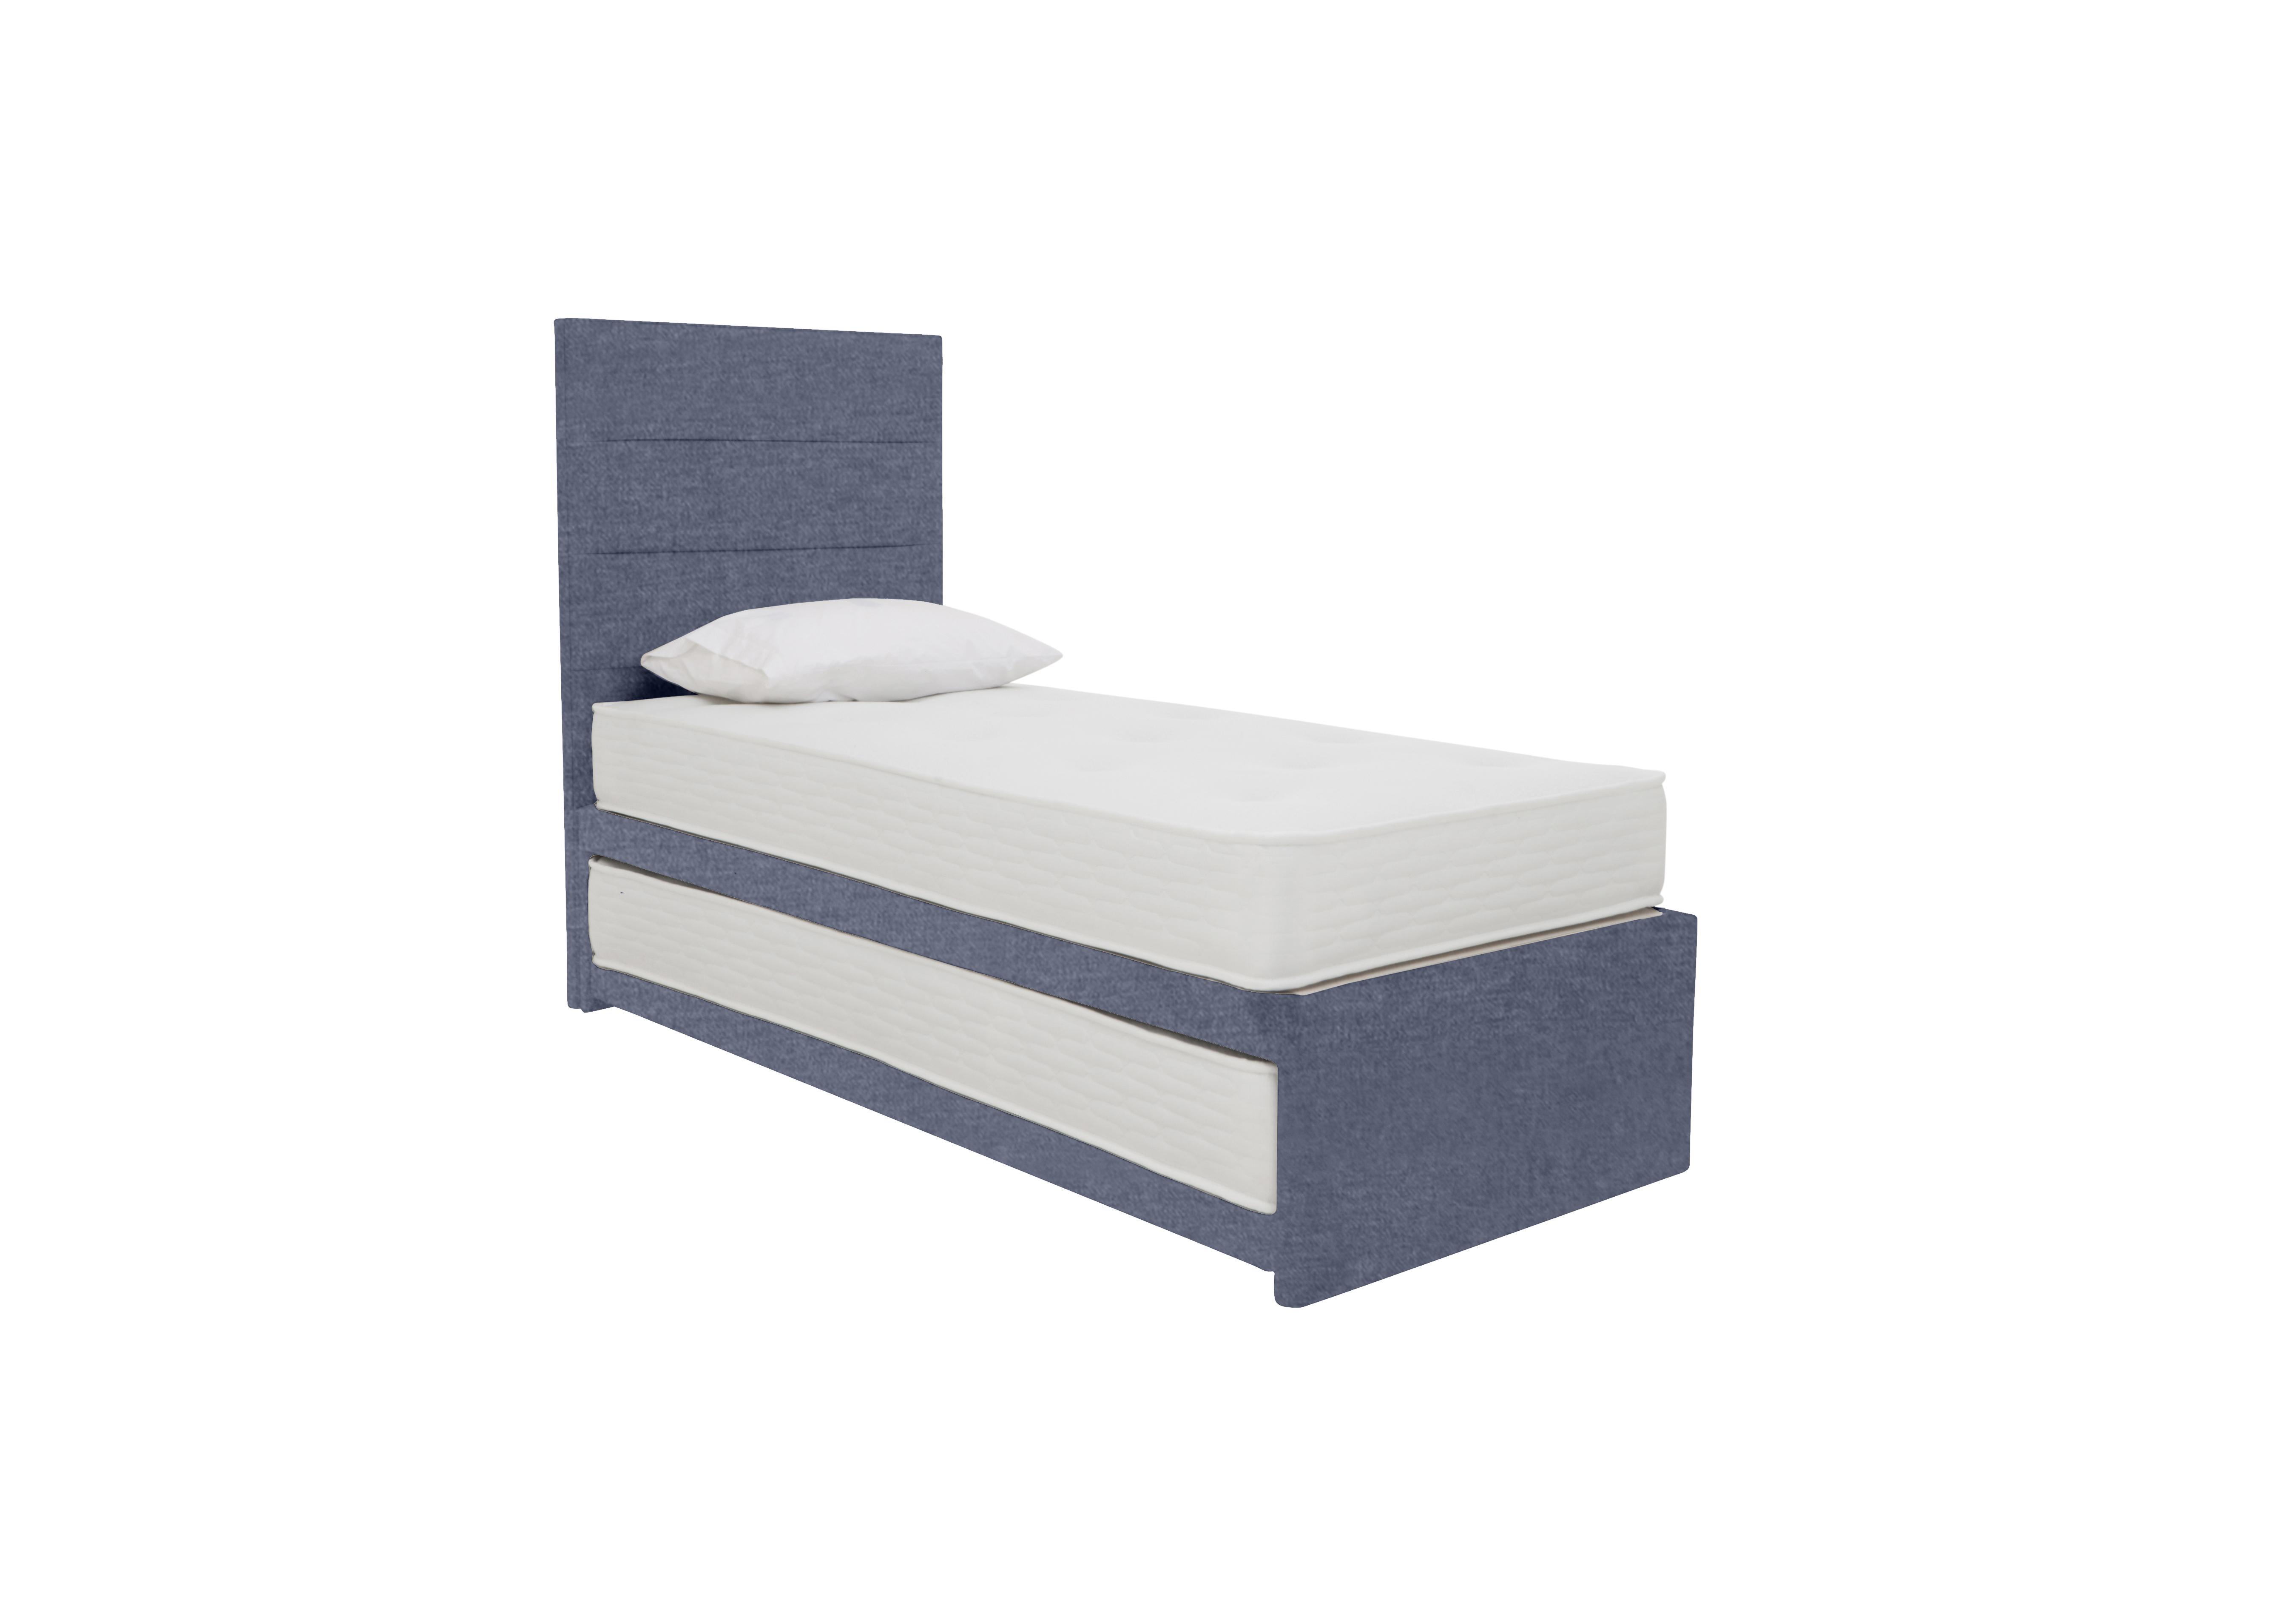 Guest Bed with Coil Mattress and Pocket Sprung Mattress in Grace Marine on Furniture Village